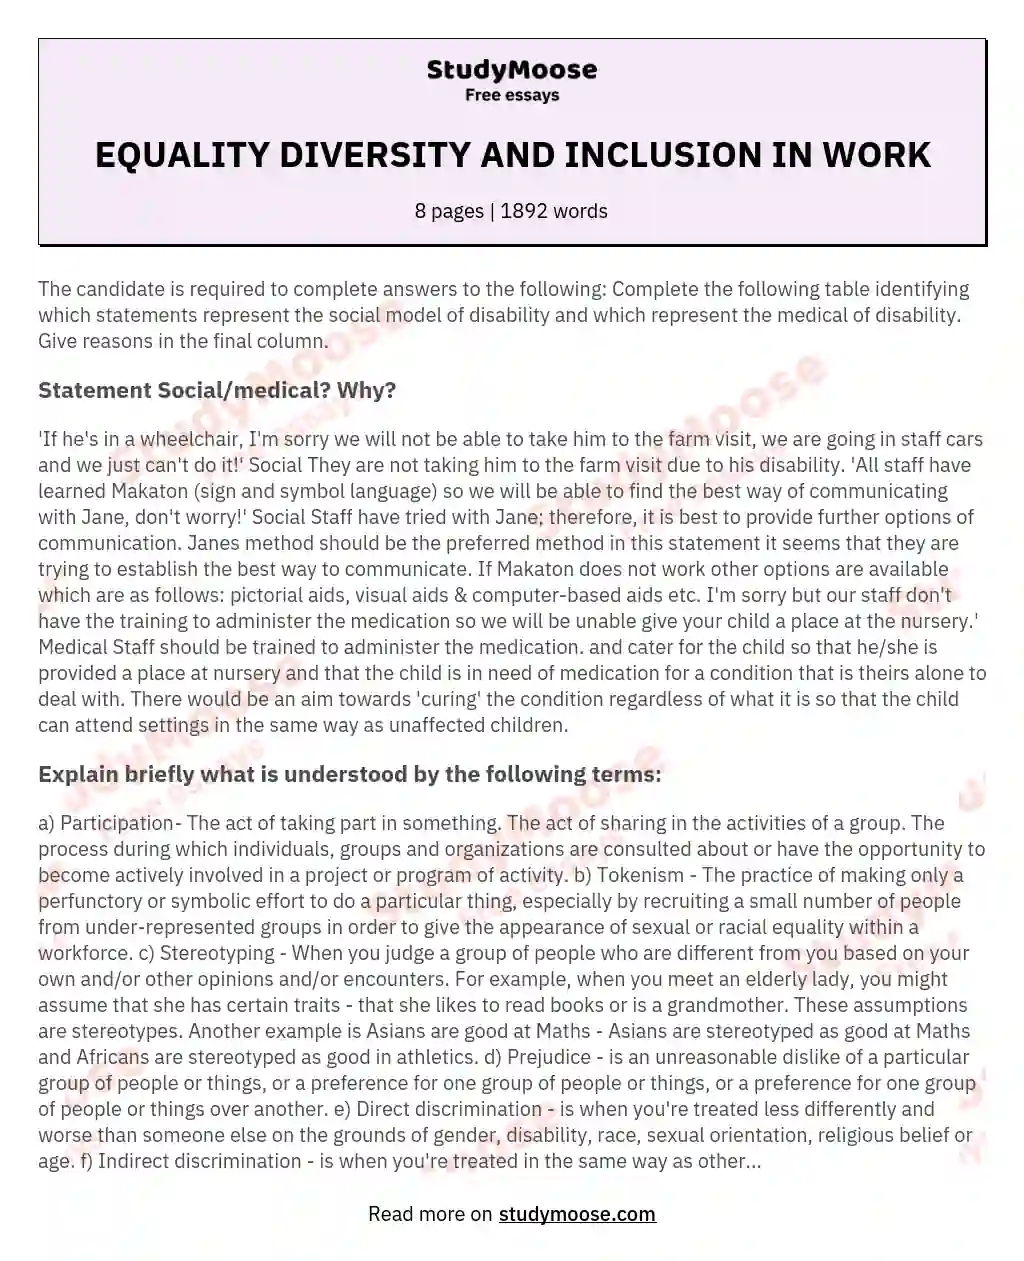 EQUALITY DIVERSITY AND INCLUSION IN WORK essay